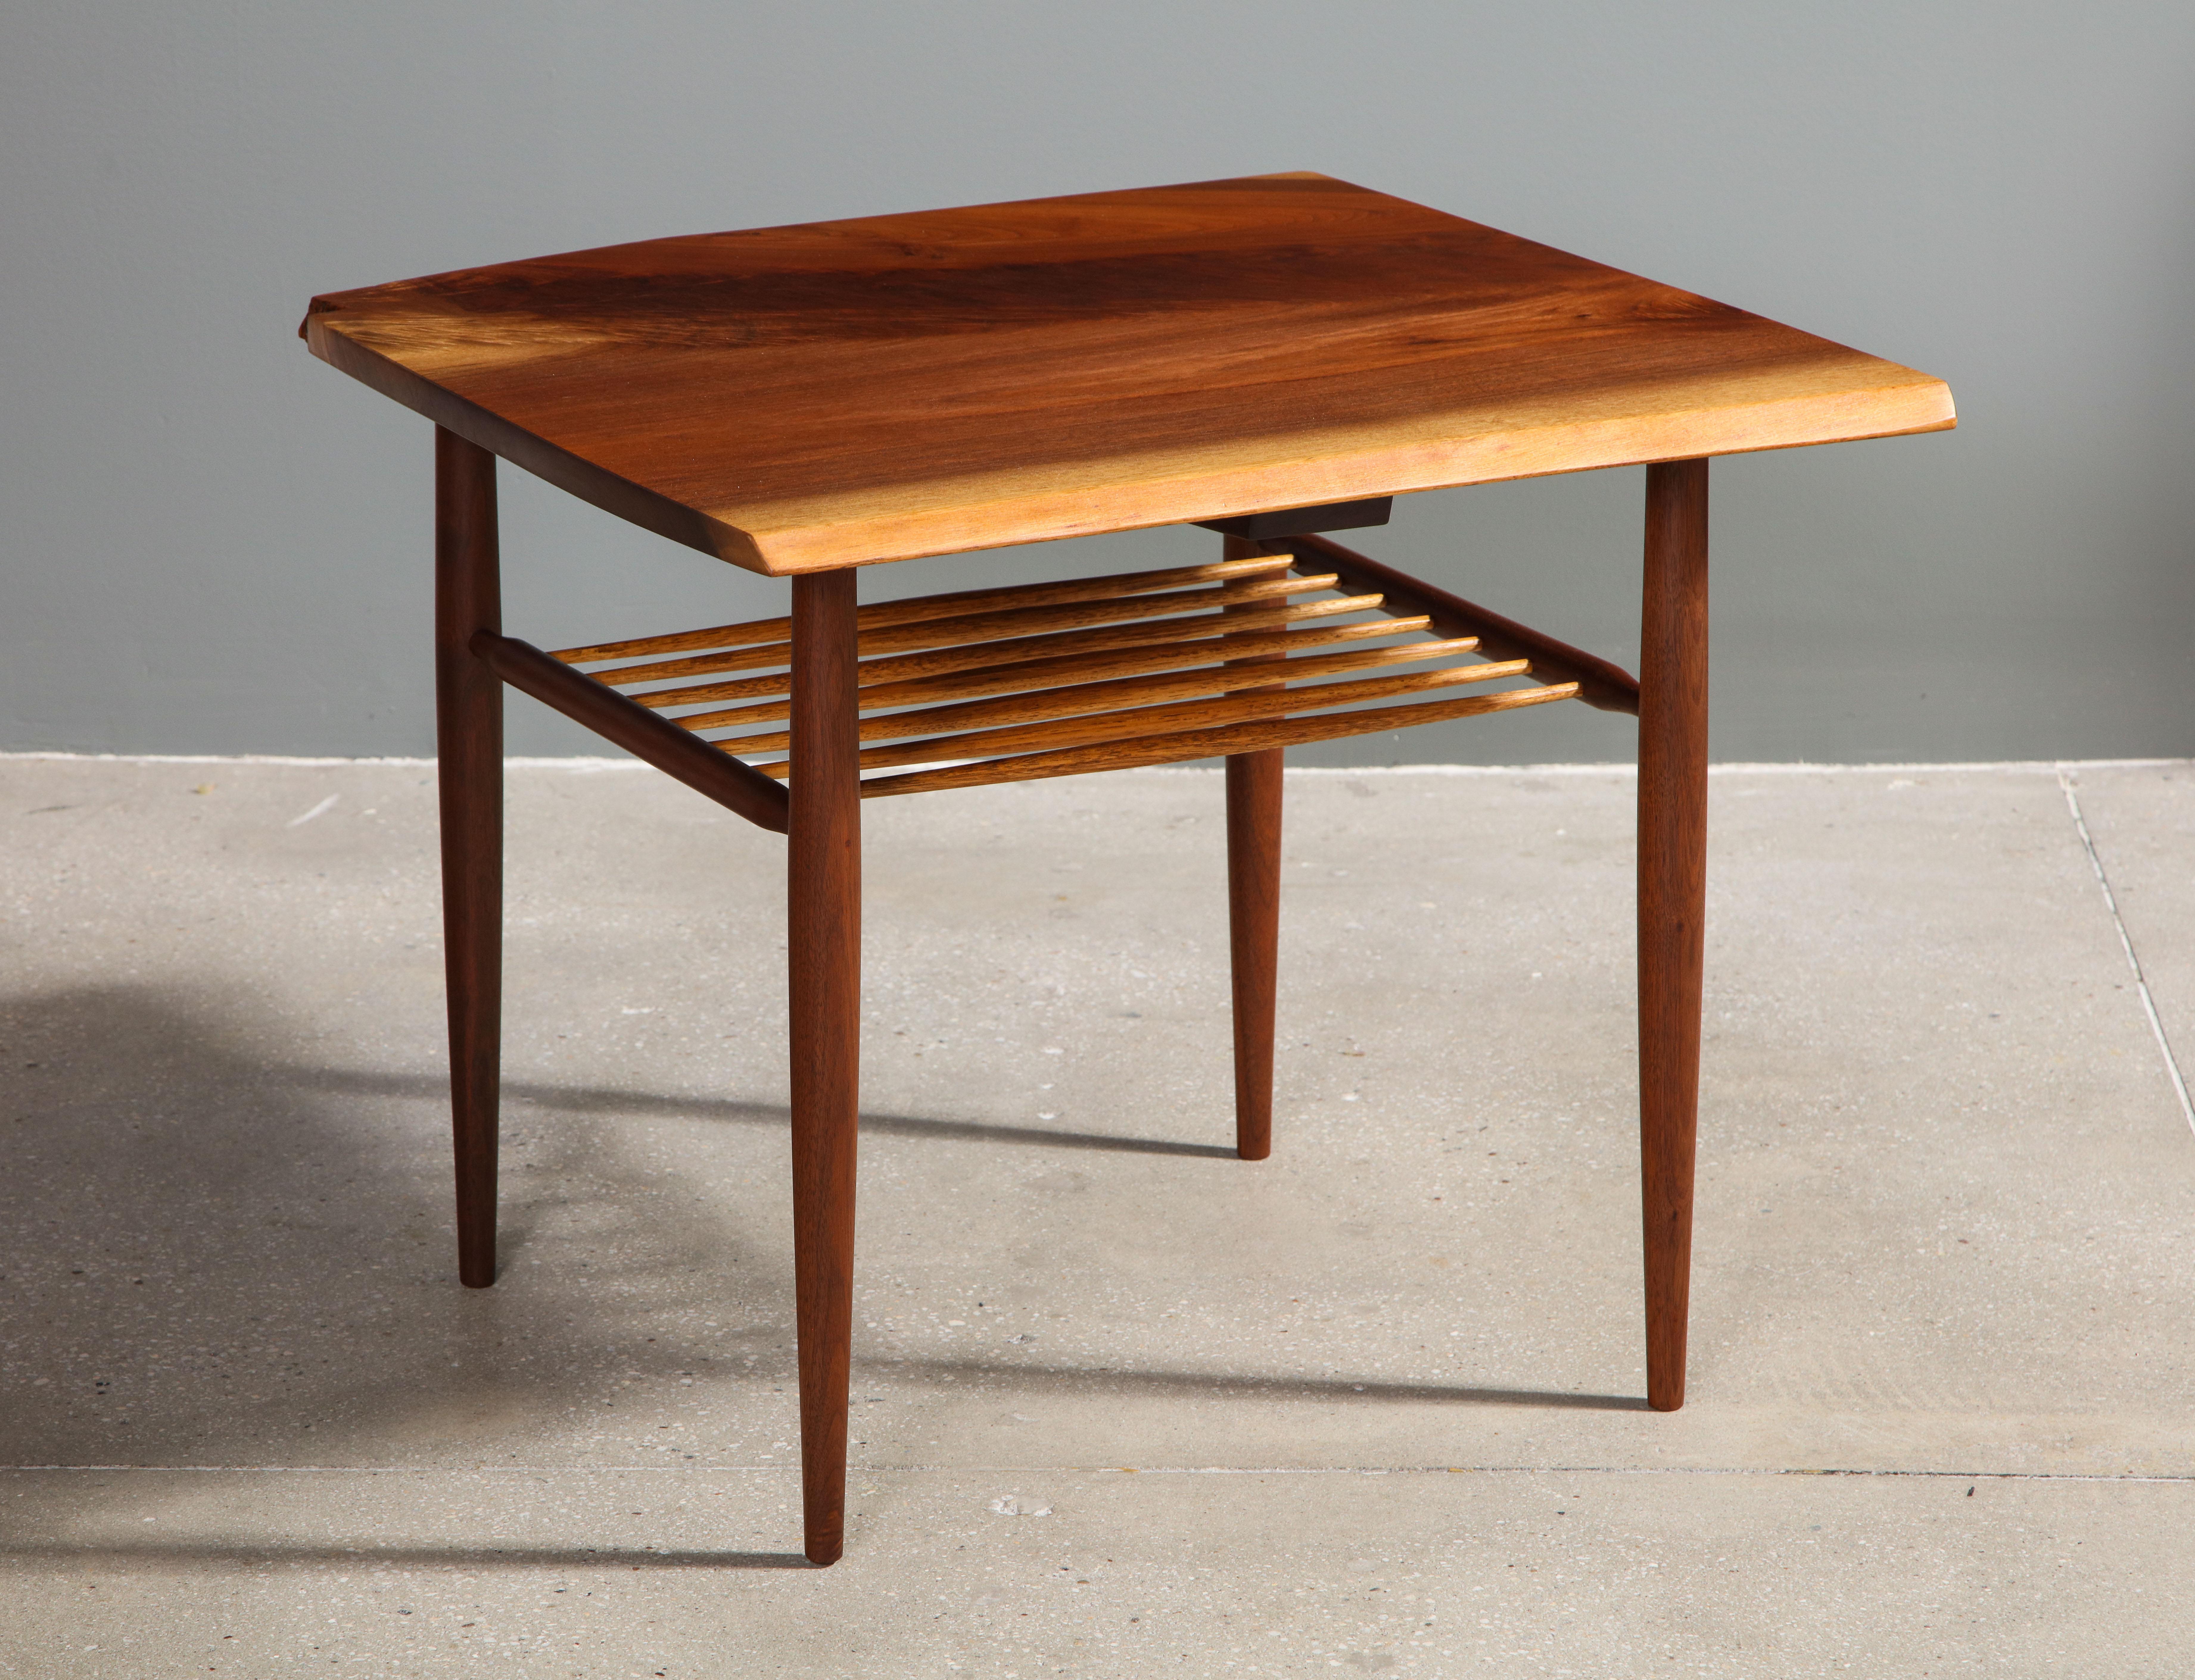 Walnut End Table with a Spindle Shelf, by George Nakashima 1